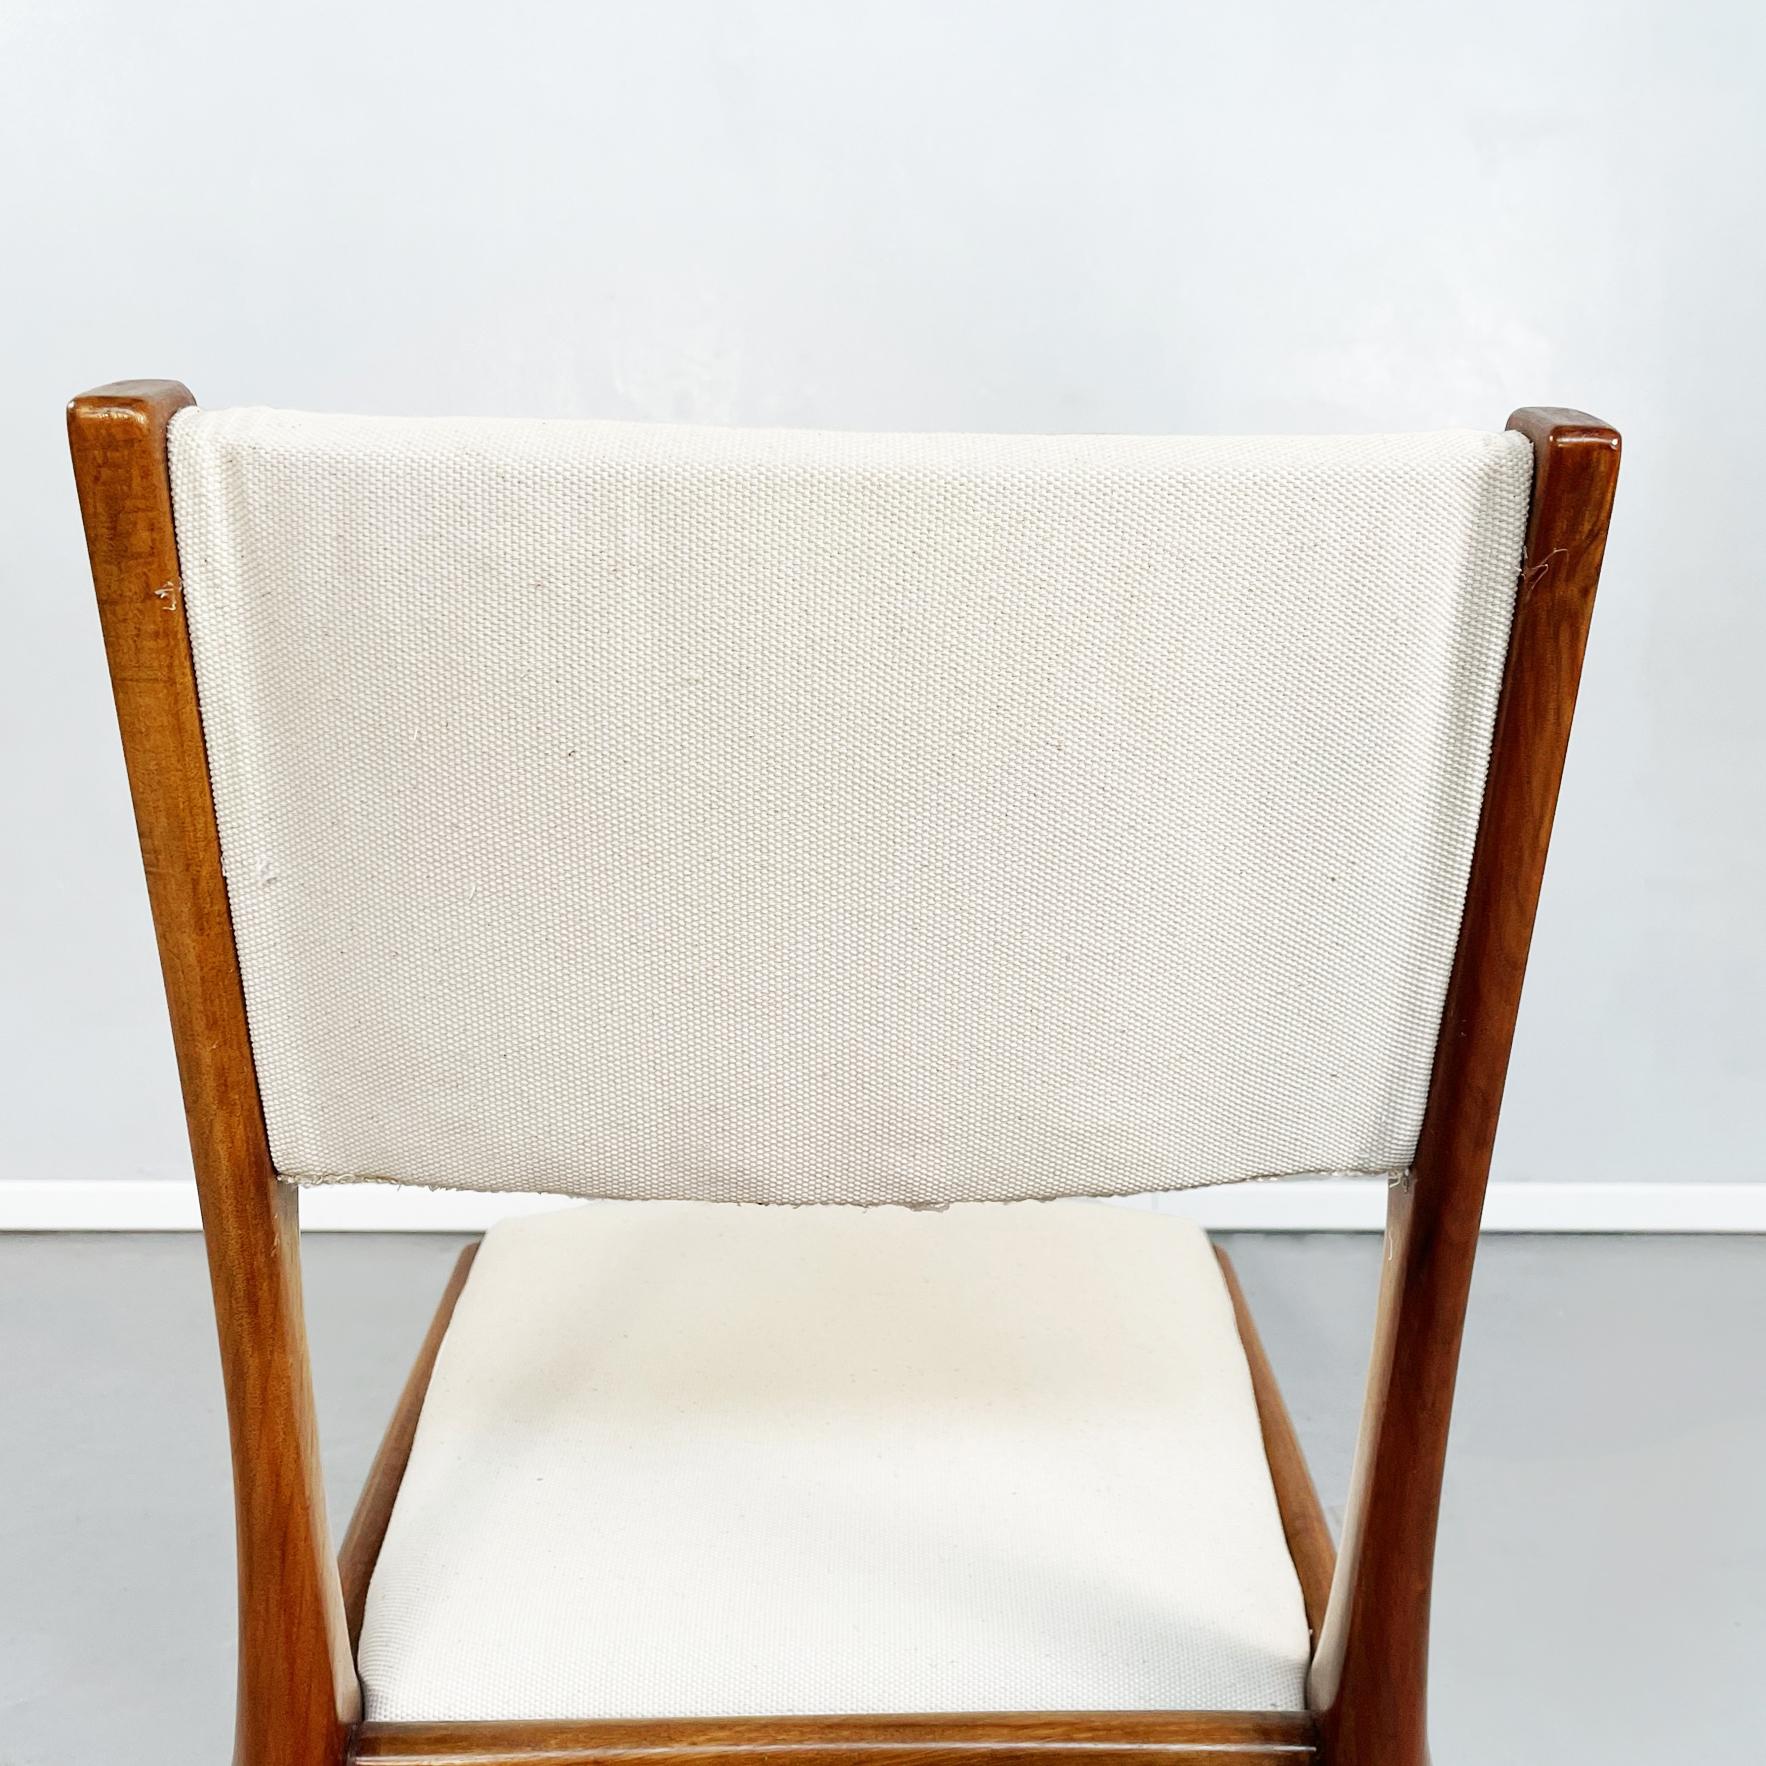 Italinan Mid-Century Modern White Fabric N Wood Chairs by De Carli Cassina, 1958 For Sale 10